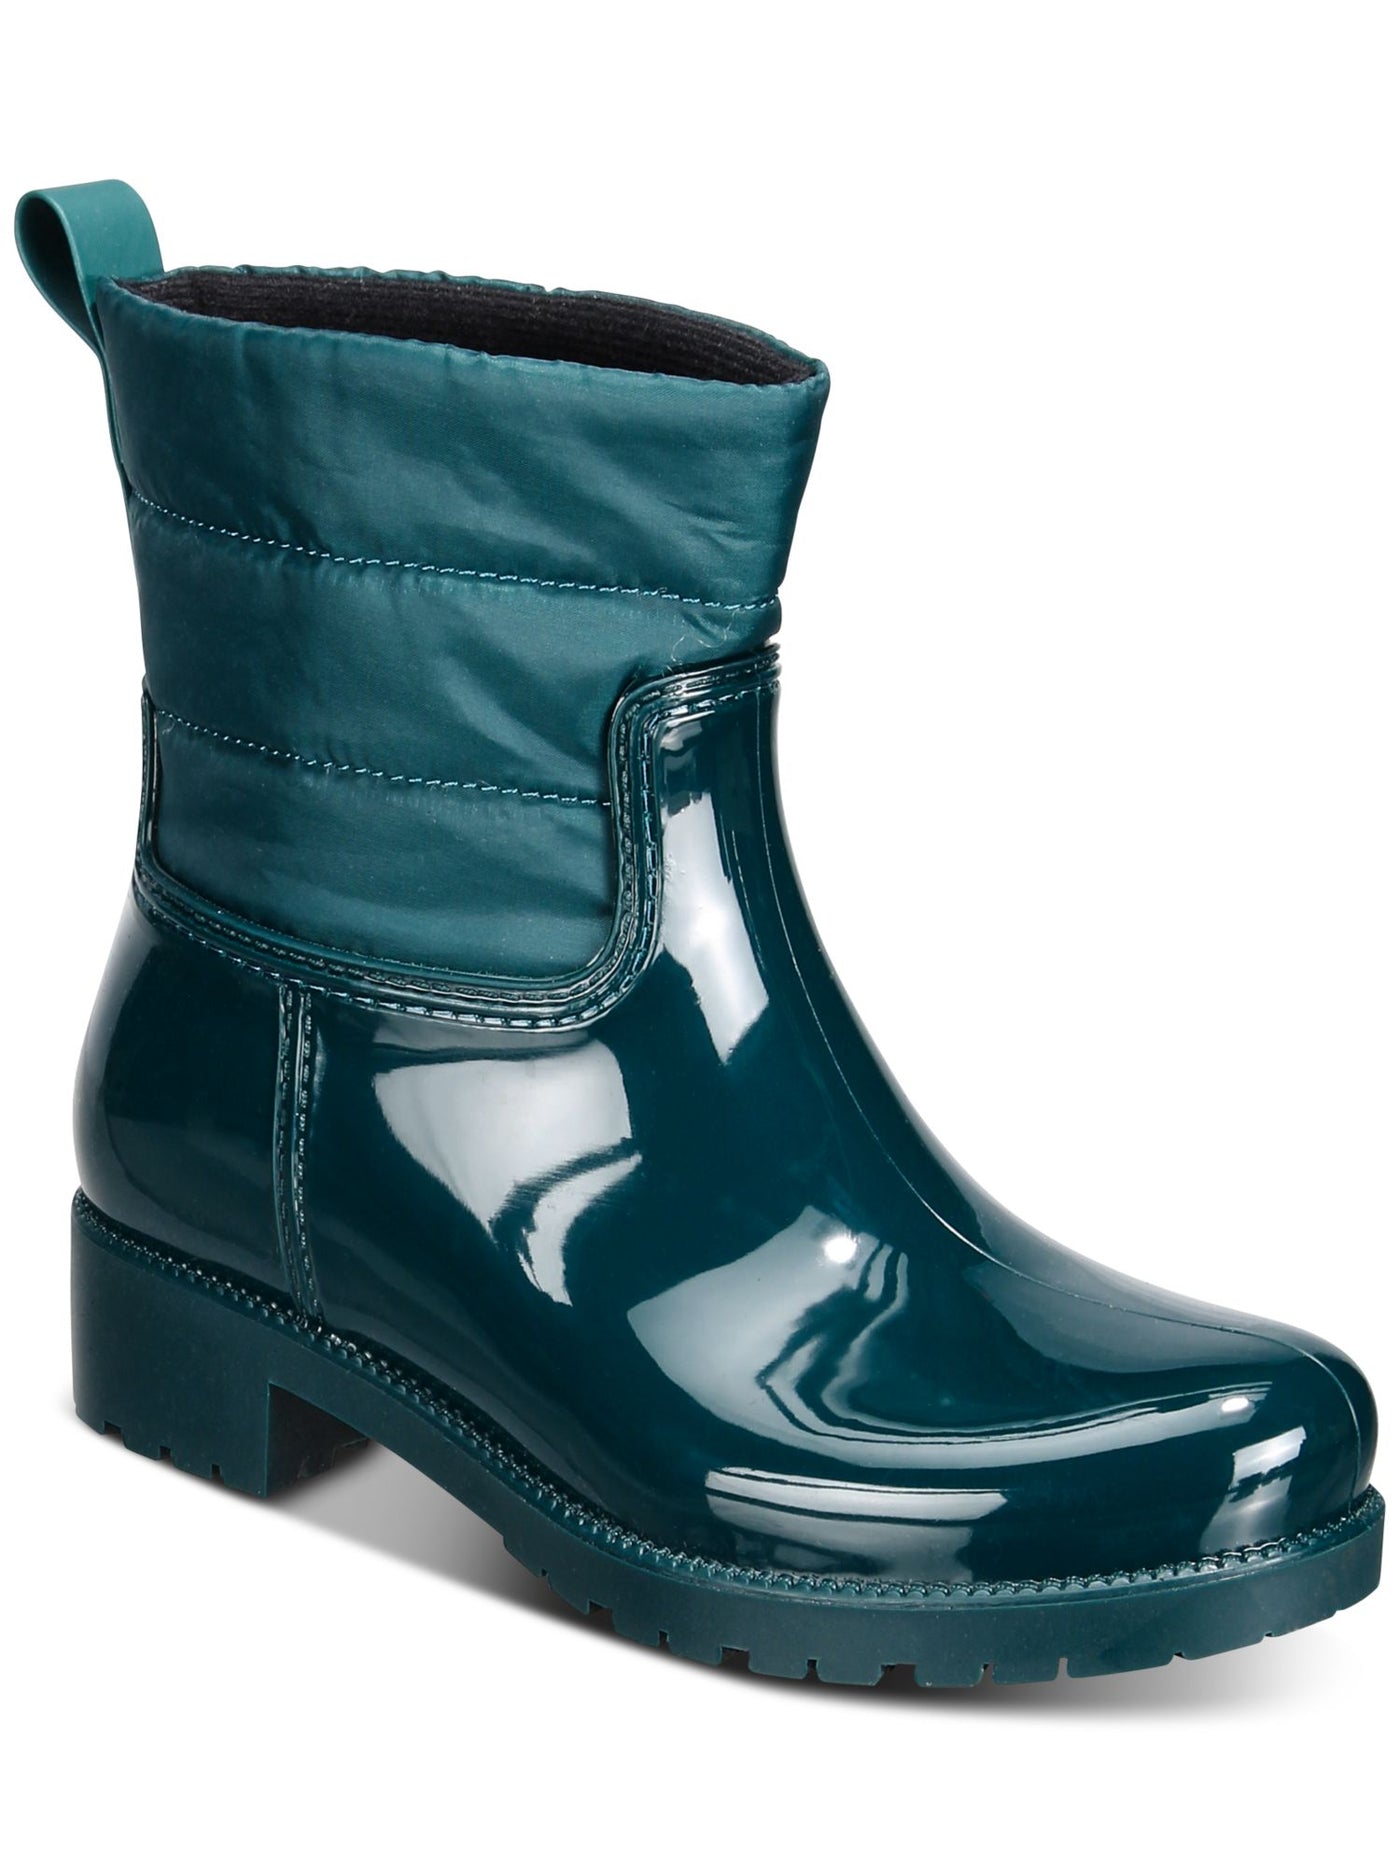 CHARTER CLUB Womens Green Back Pull-Tab Water Resistant Padded Trudyy Round Toe Block Heel Rain Boots 6 M